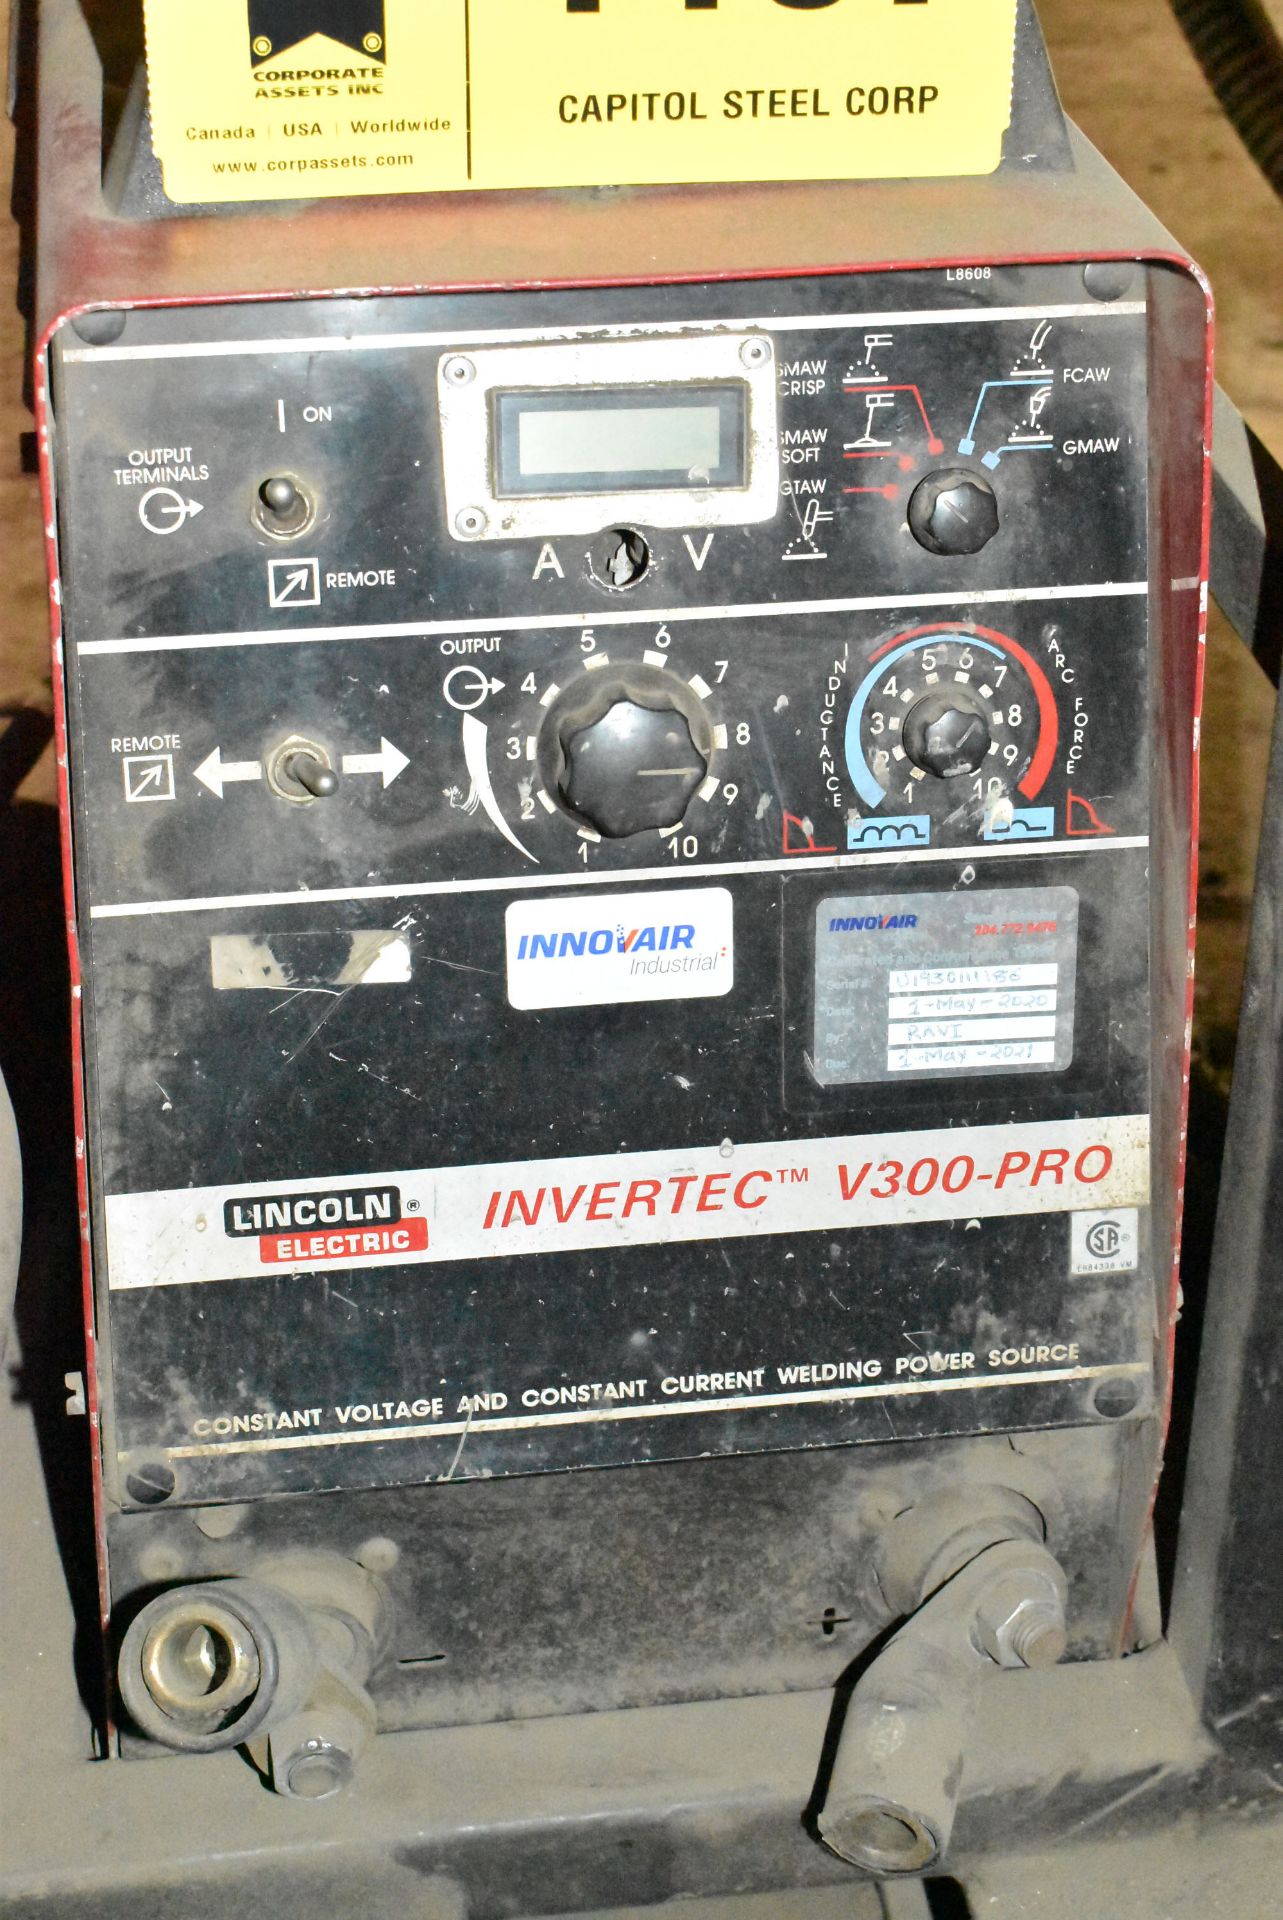 LINCOLN ELECTRIC INVERTEC V300-PRO MULTI-PROCESS WELDING POWER SOURCE (CABLES NOT INCLUDED), S/N: - Image 2 of 4